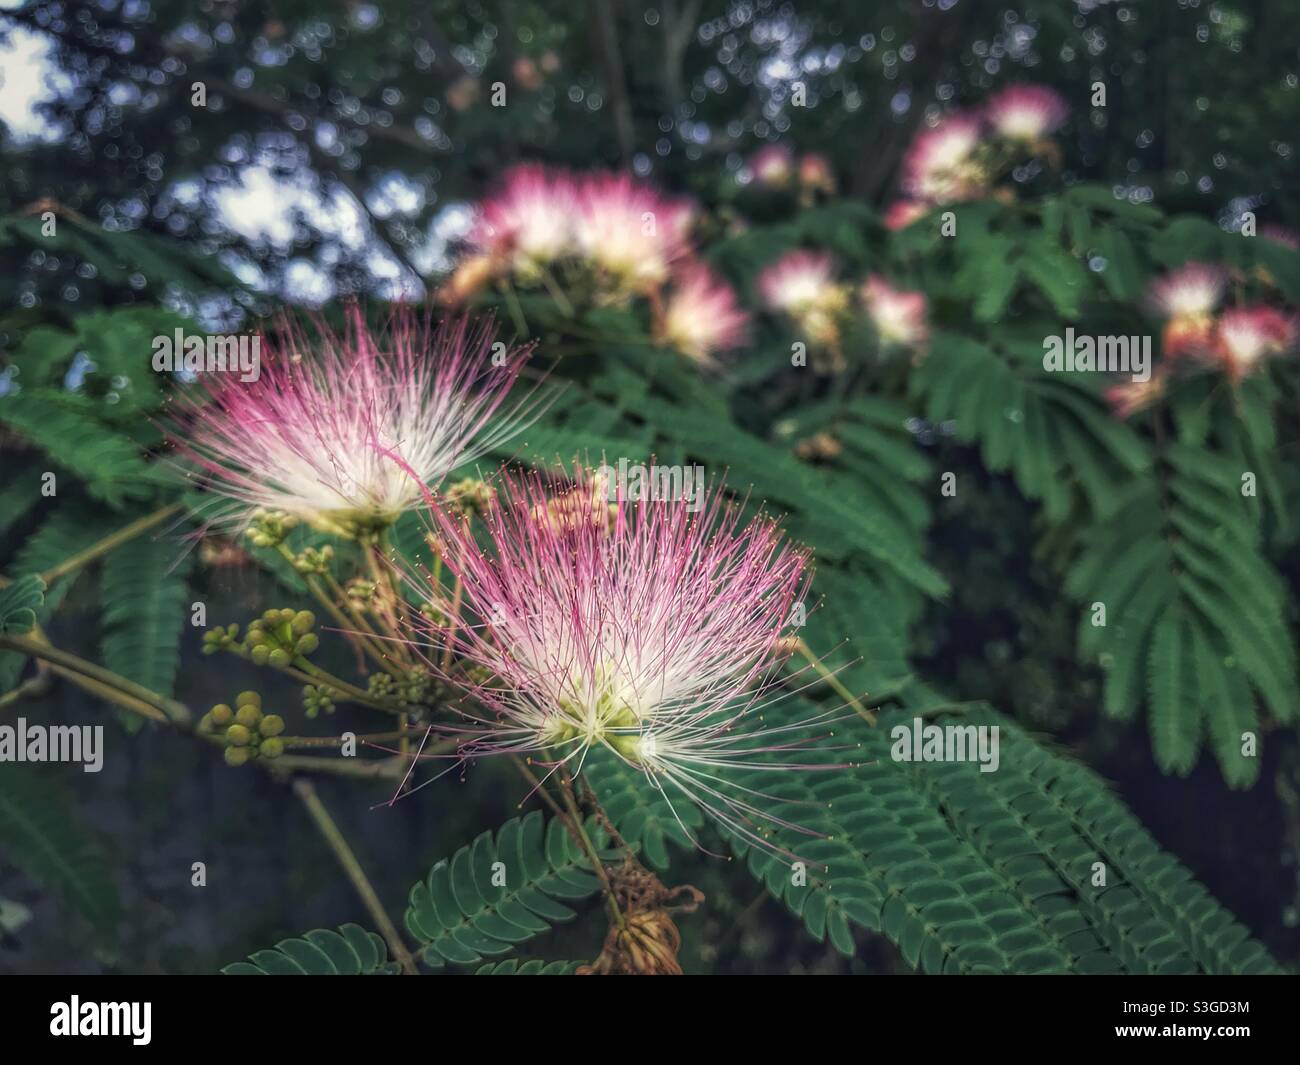 Mimosa blossoms in tree Stock Photo